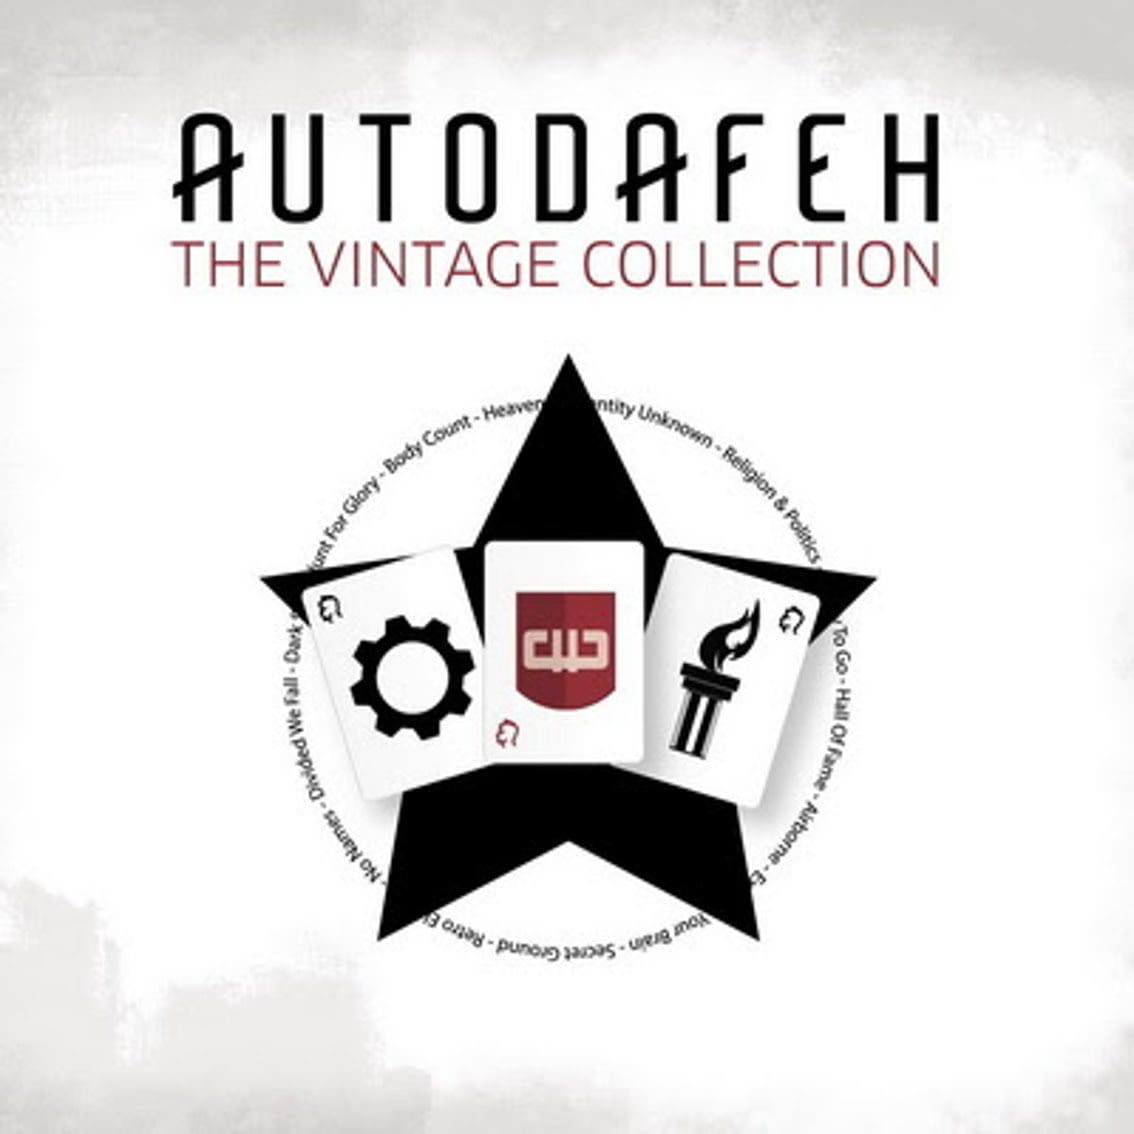 Autodafeh releases limited edition vinyl for 'The Vintage Collection'